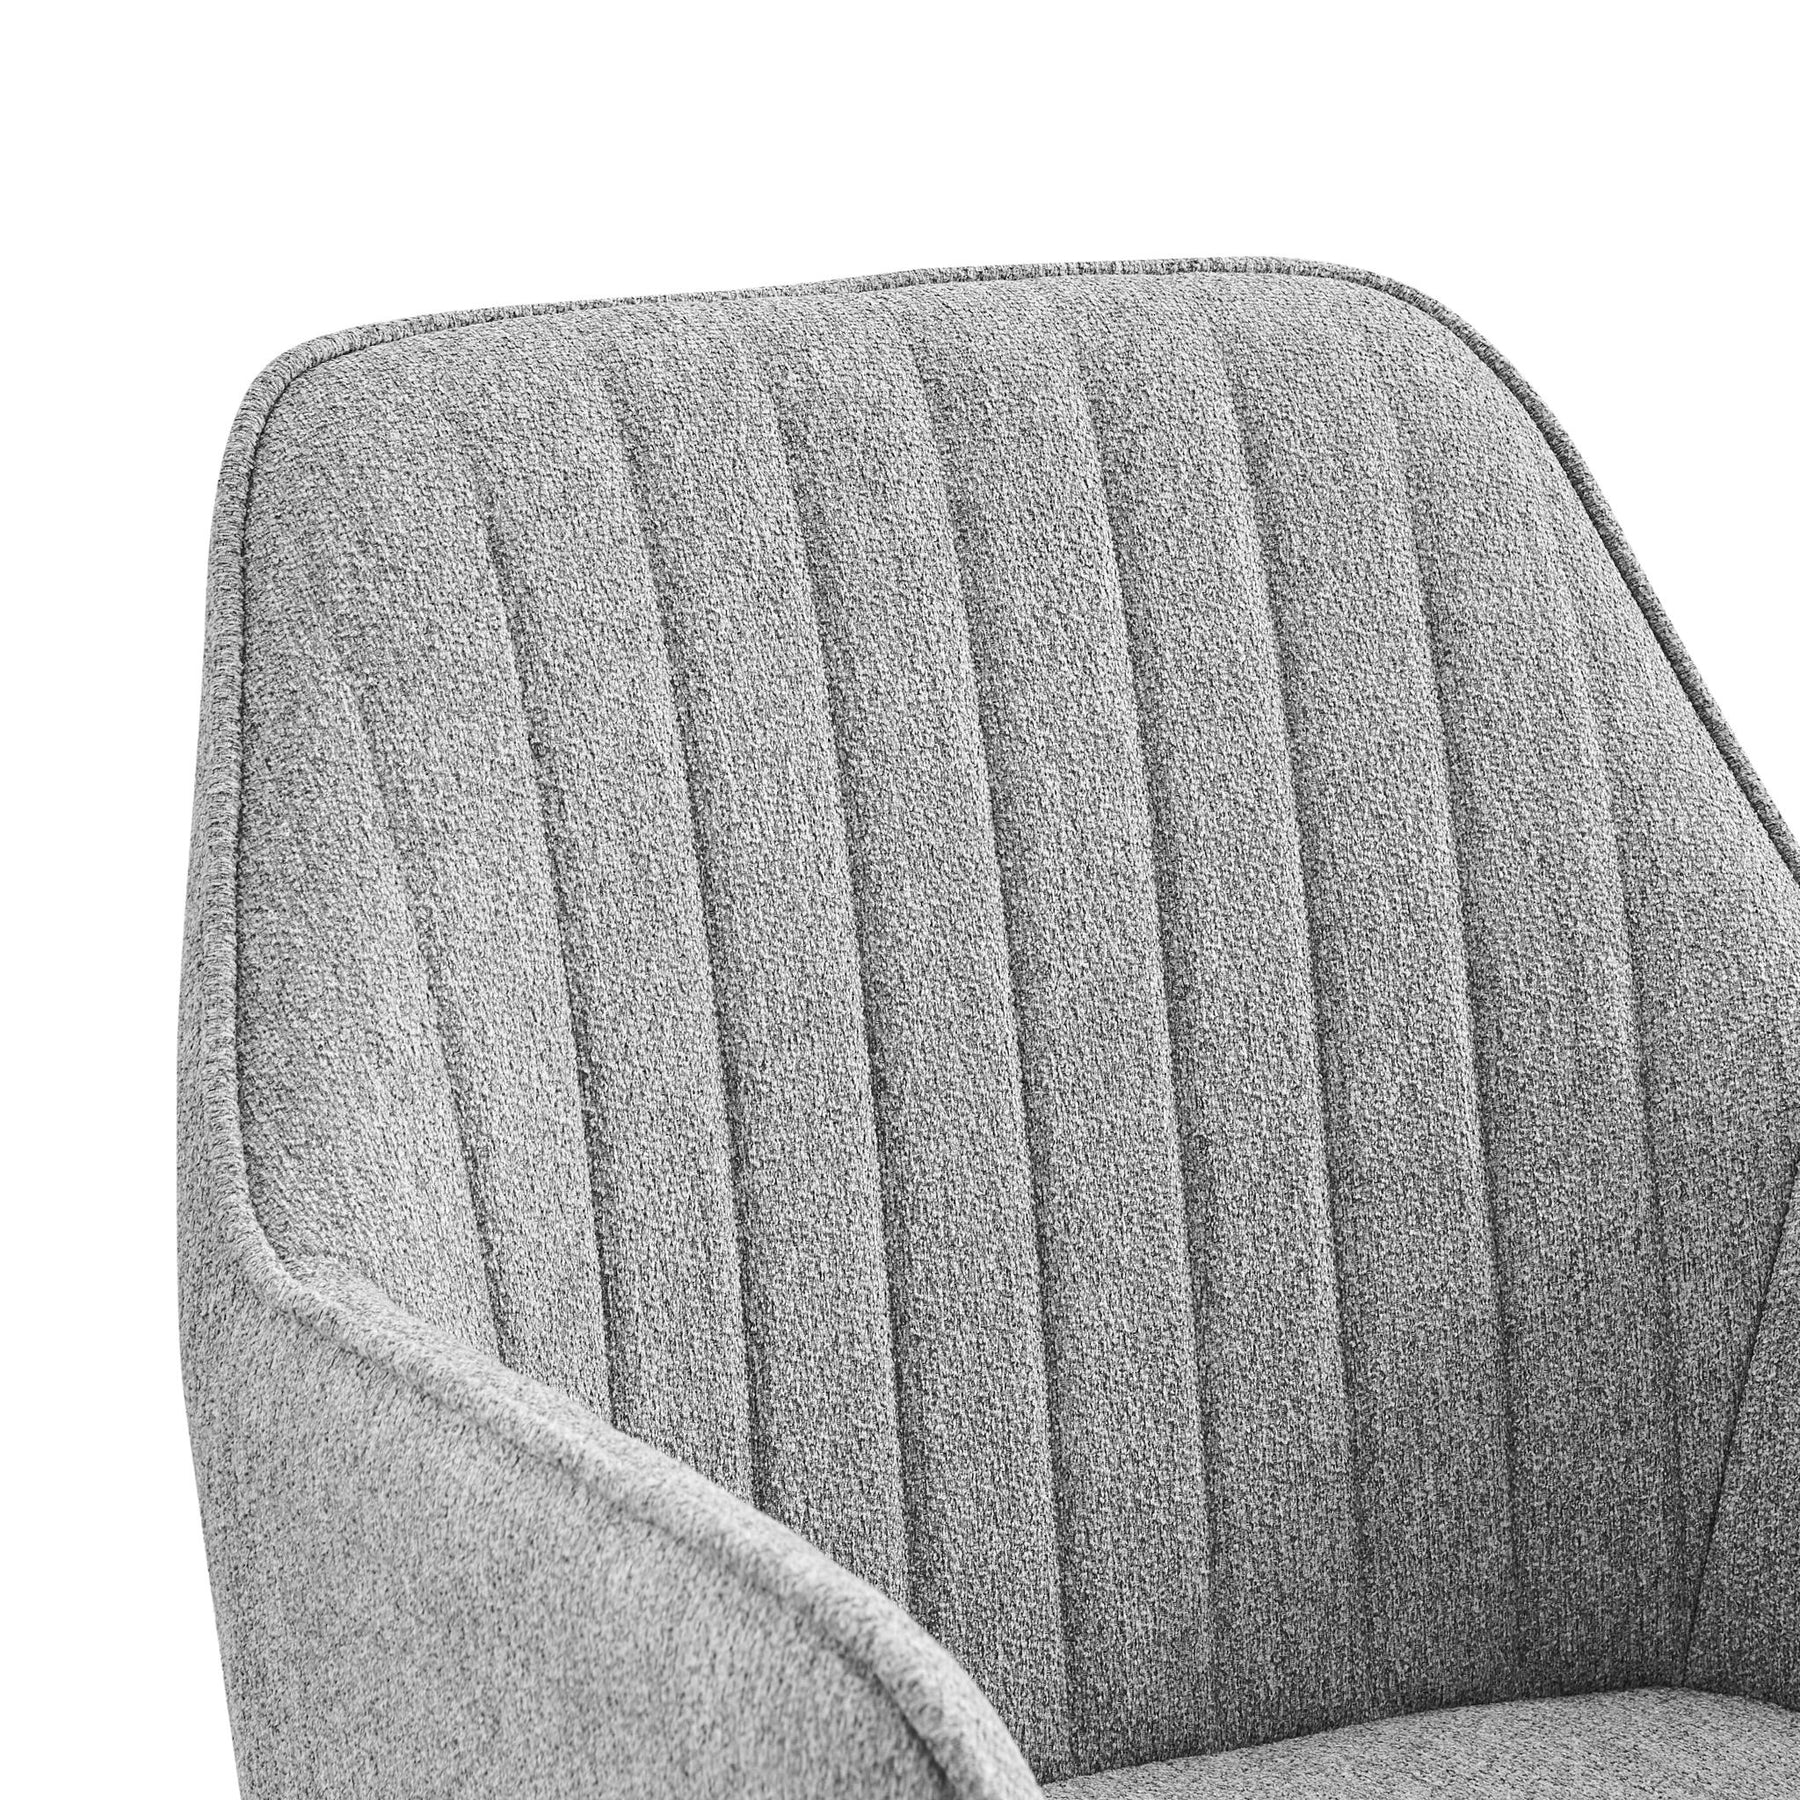 Thompson Fabric Swivel Office Arm Chair by New Pacific Direct - 9300124